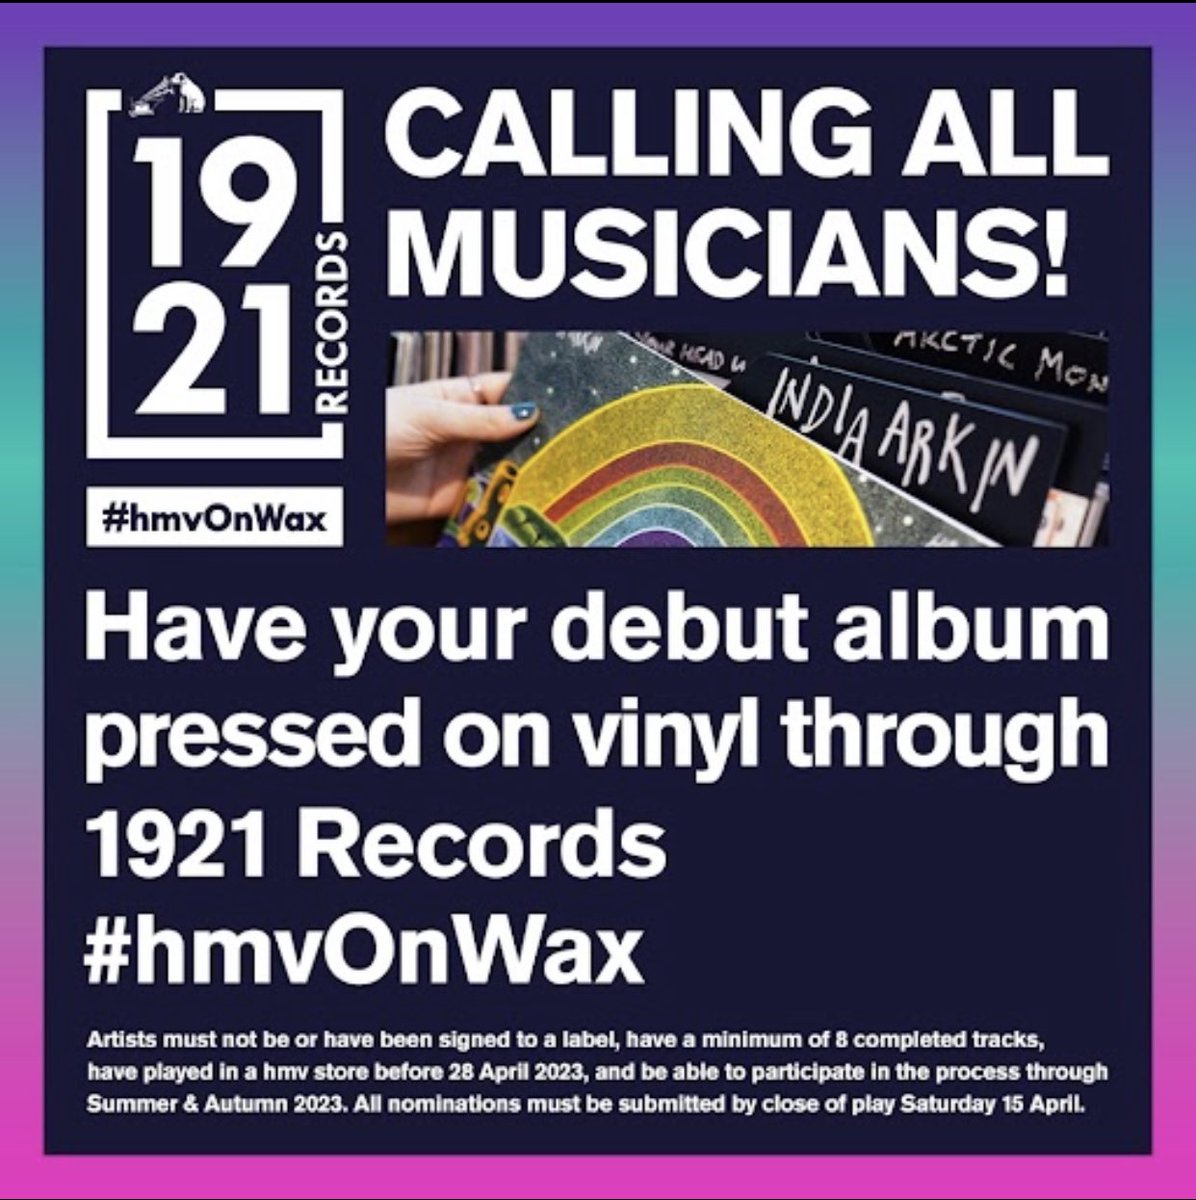 Calling all artists the search is on for next artists on 1921 Records 

#hmvOnWax #hmvLiveandLocal #hmv1921records #oxfordmusicscene #oxfordmusic